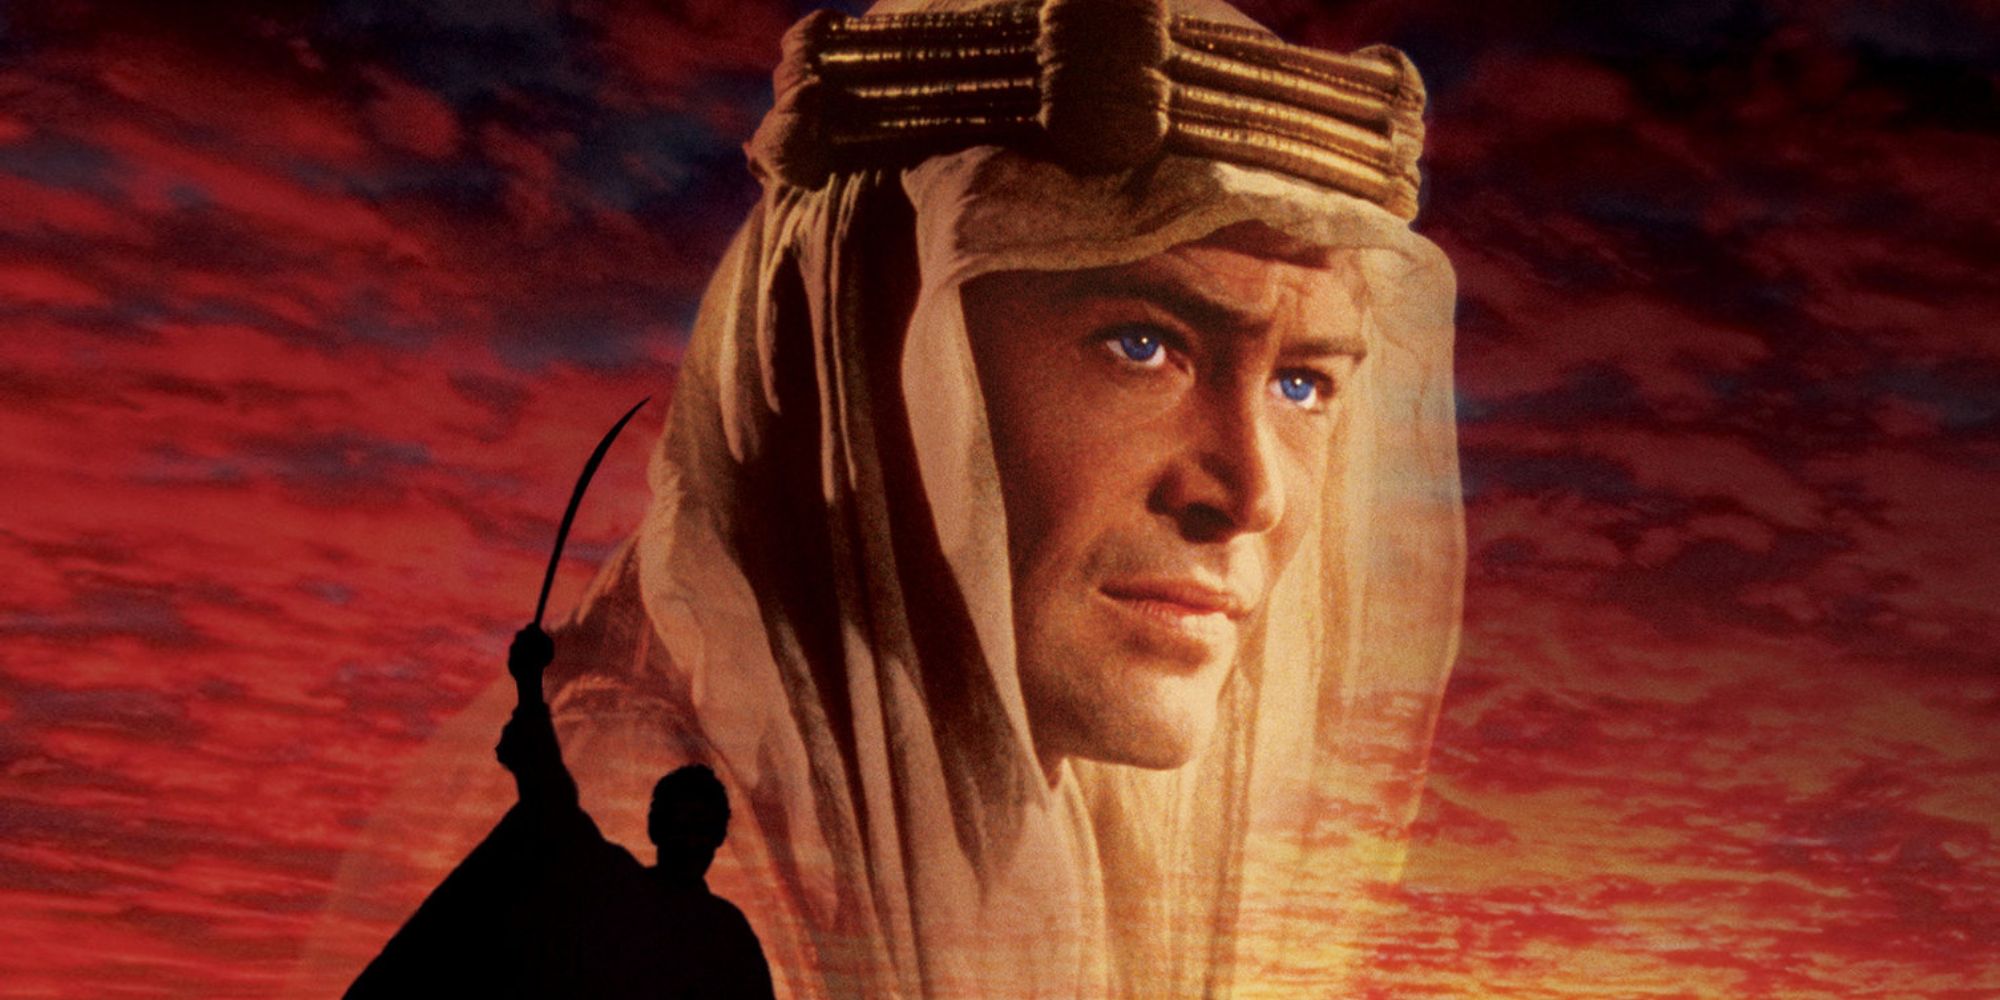 1962 Movie poster of Lawrence of Arabia